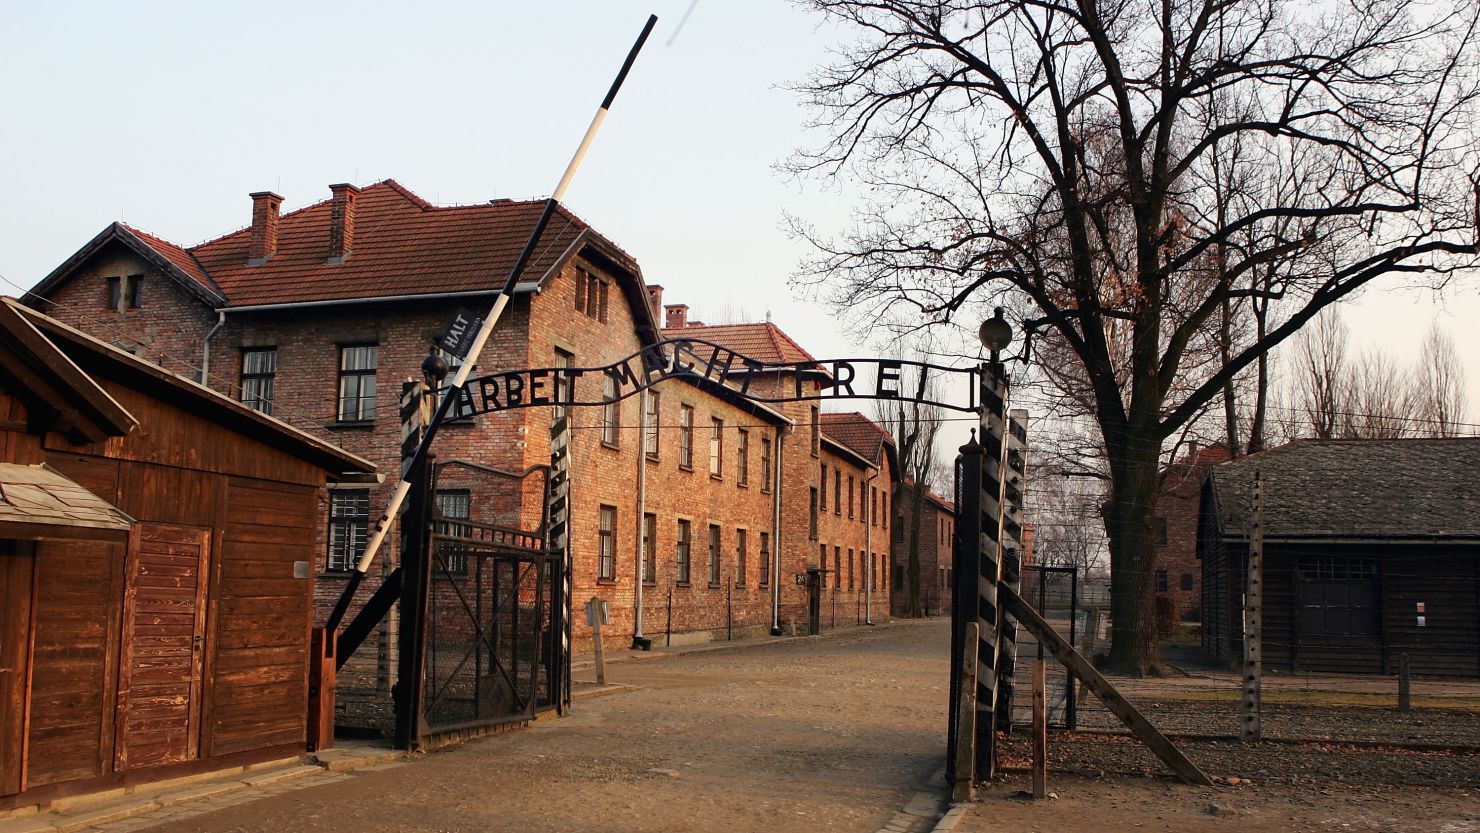 Exterior view of Auschwitz complex (file) shows the entrance gates with words "Arbeit Macht Frei" (Work Makes One Free).